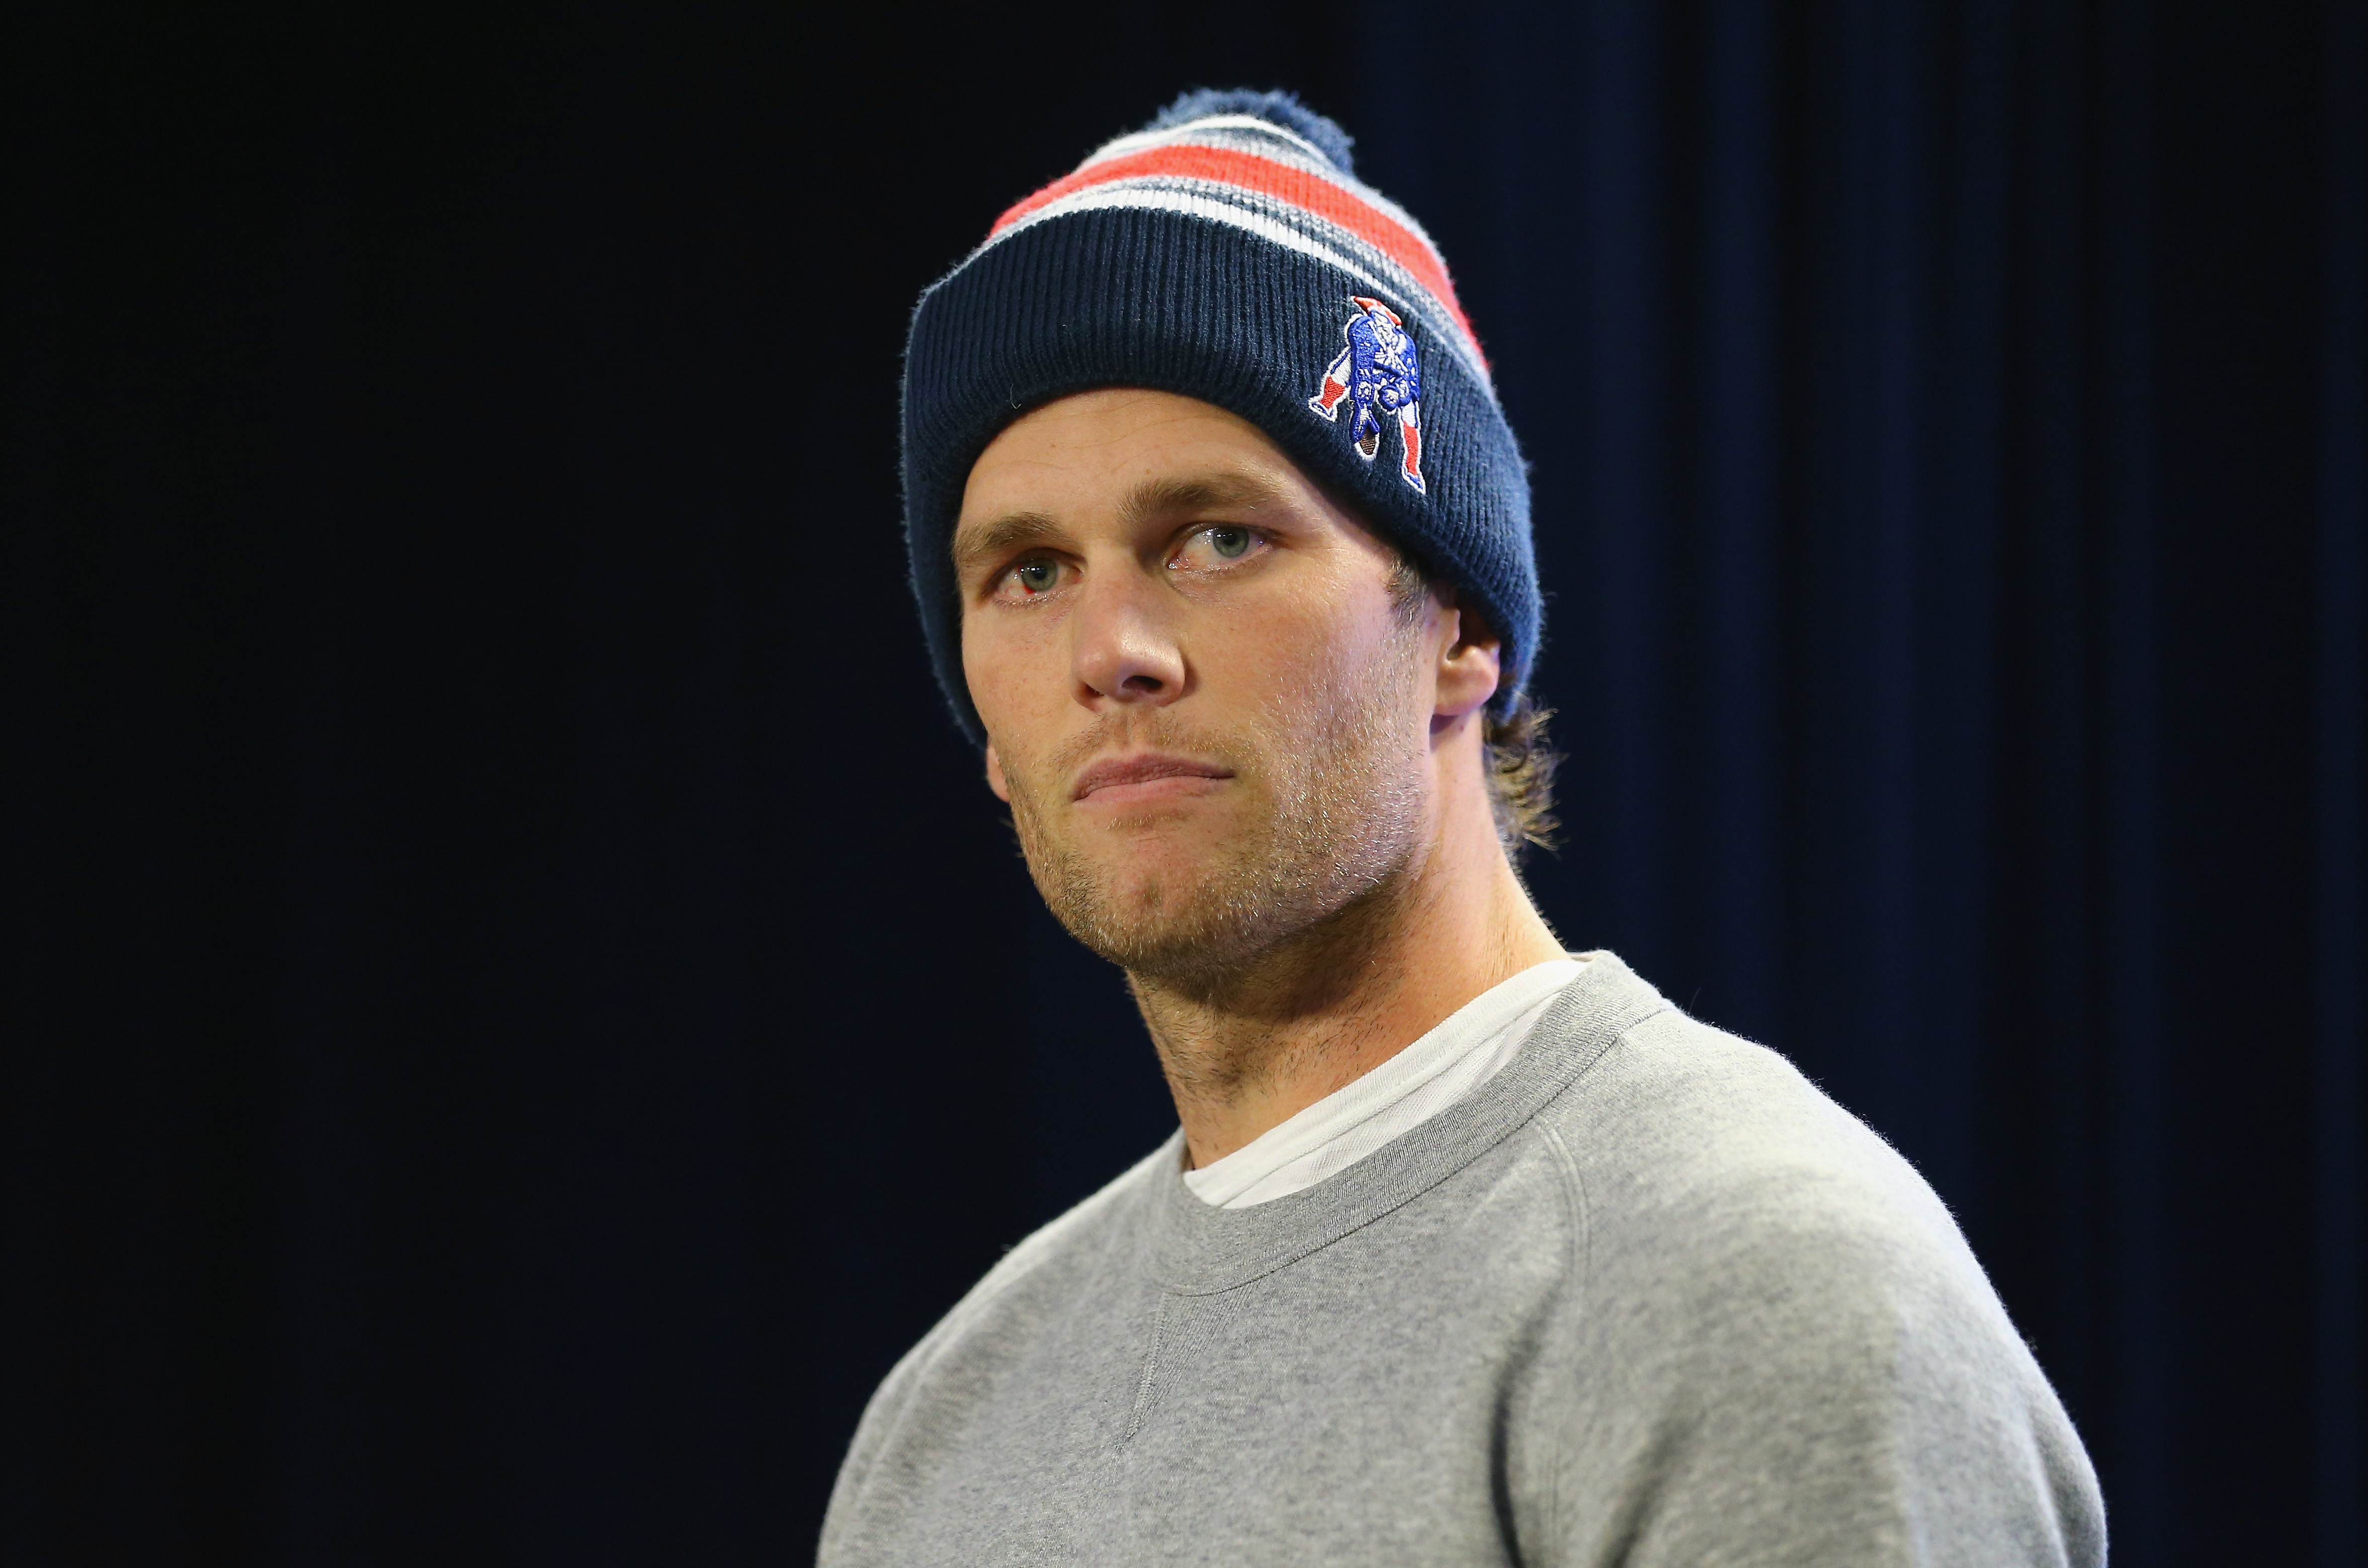 Tom Brady talks during a press conference at Gillette Stadium in Foxboro, Mass., on Jan. 22, 2015 (Maddie Meyer—Getty Images)